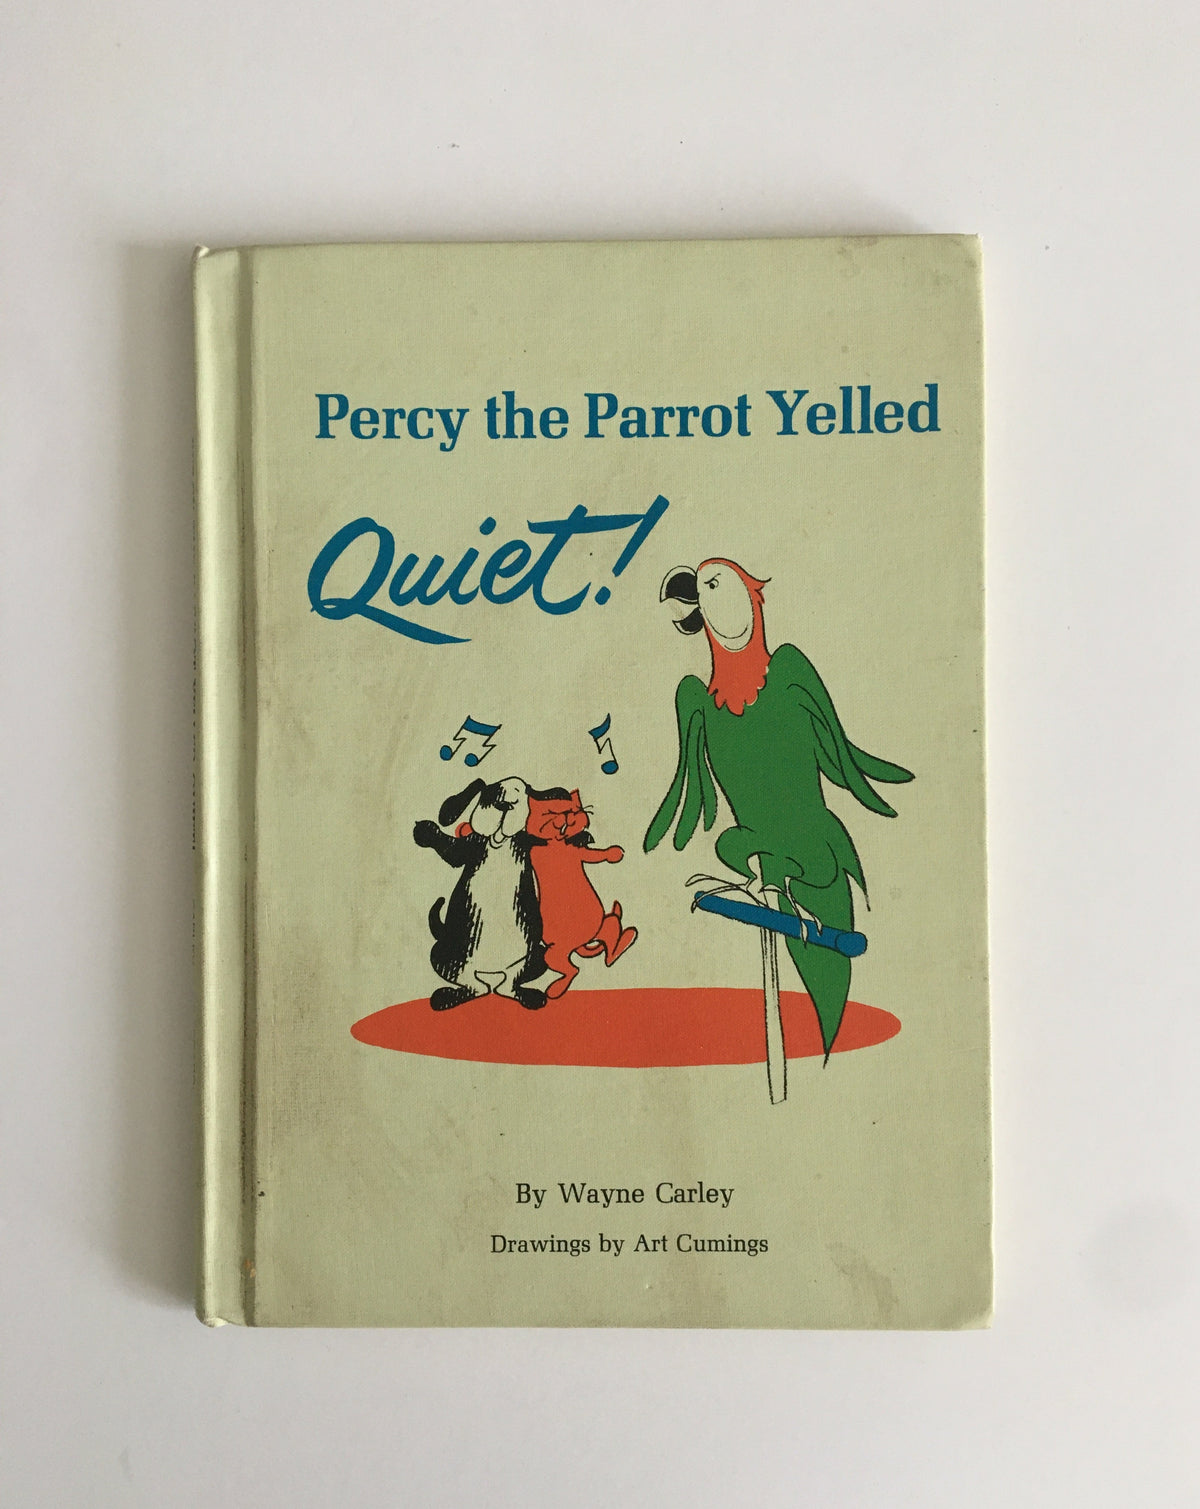 Percy the Parrot Yelled Quiet! by Wayne Carley